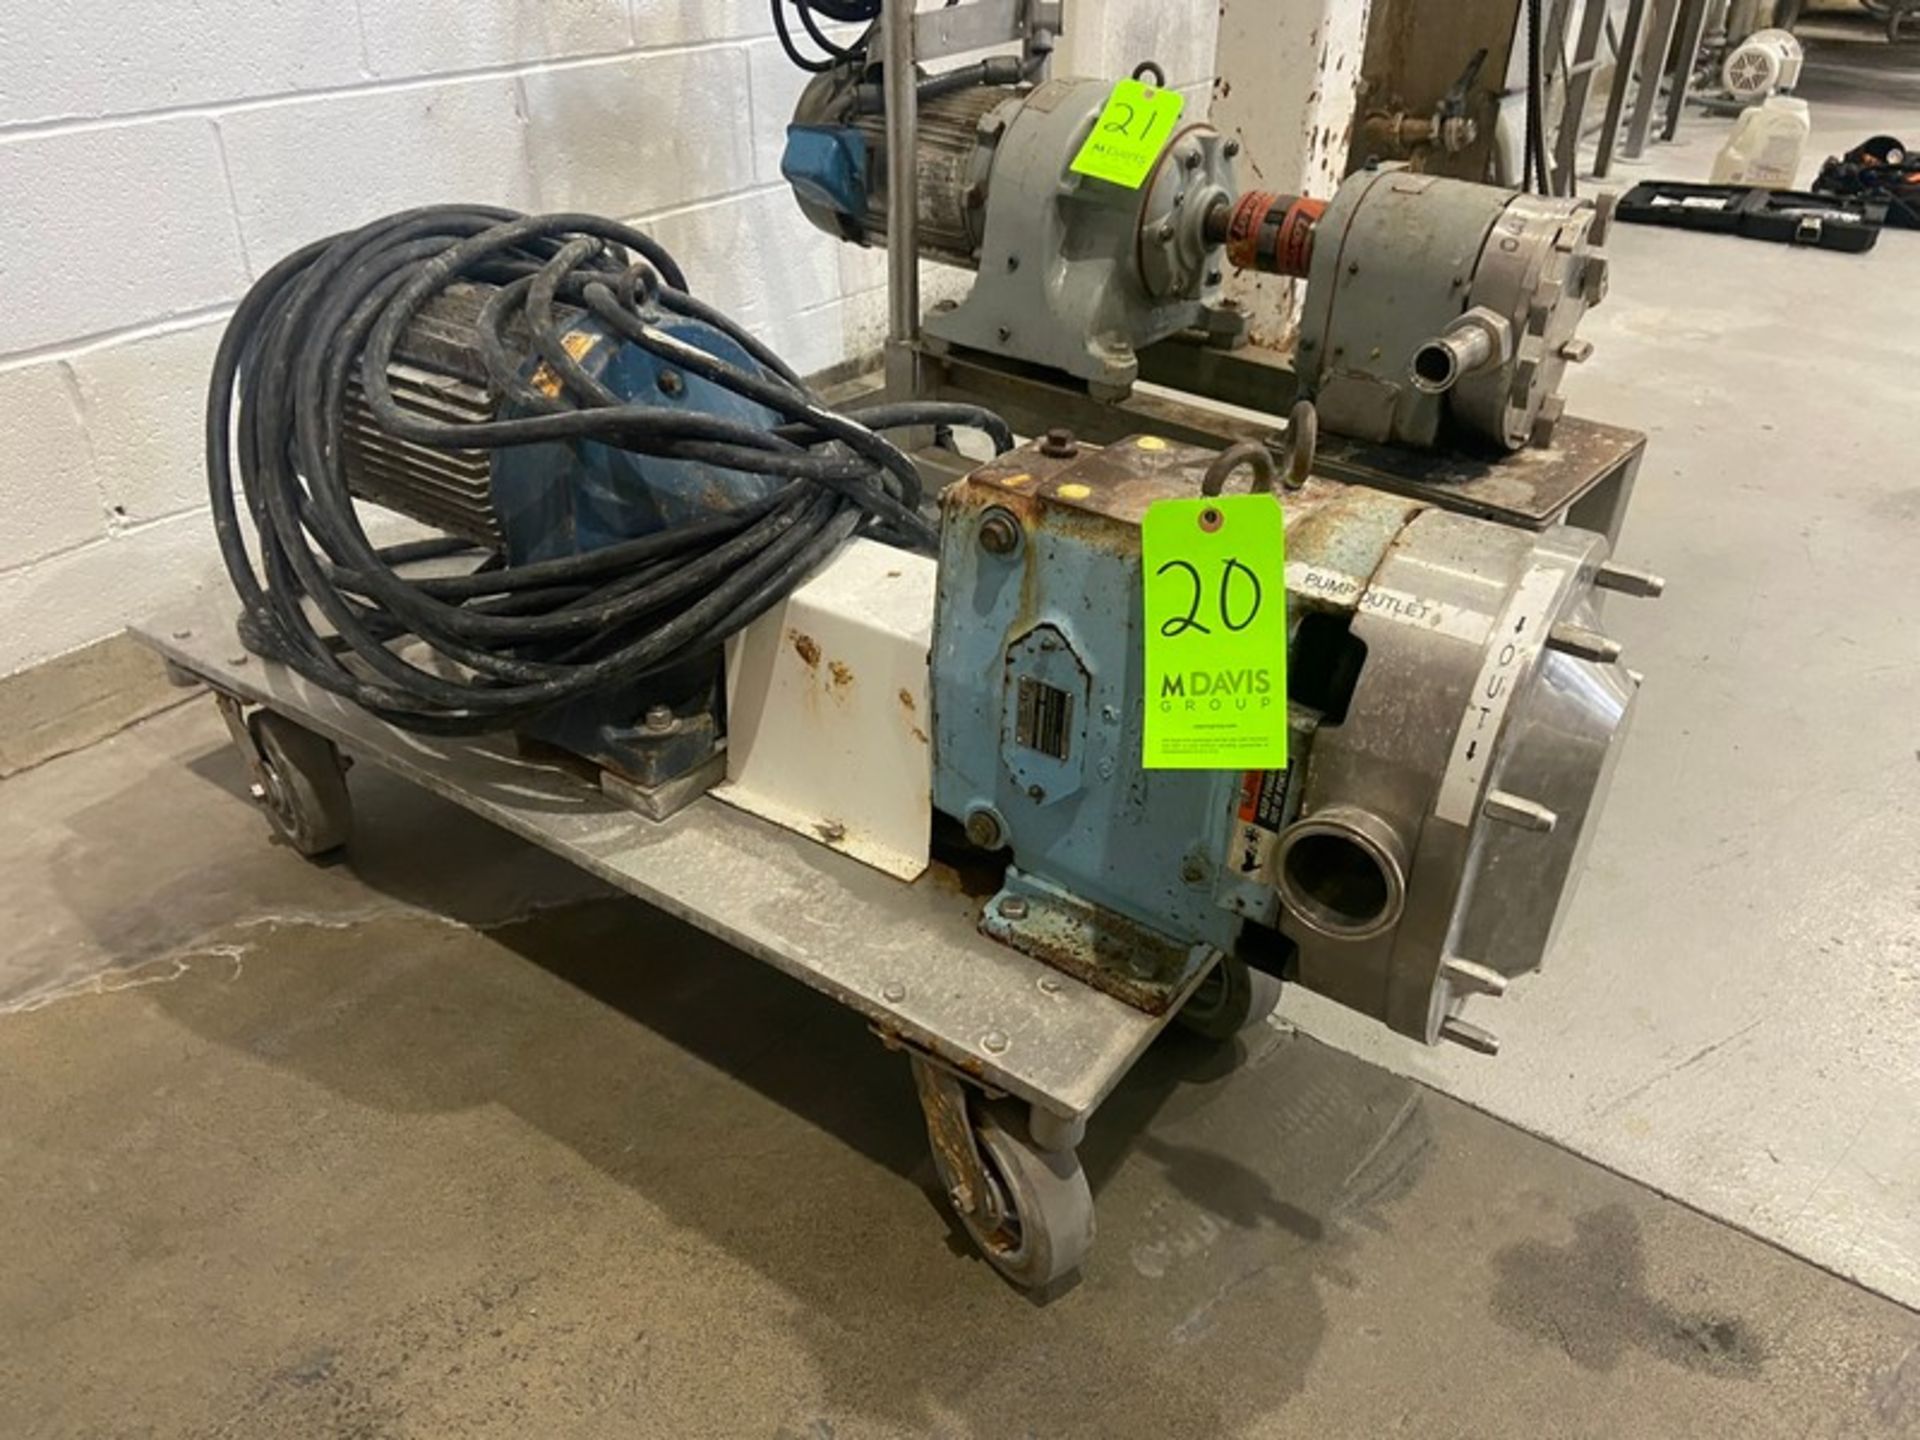 Waukesha Cherry-Burrell 7.5 hp Positive Displacement Pump, M/N 12C60, S/N 198836 97, with Aprox. 2-